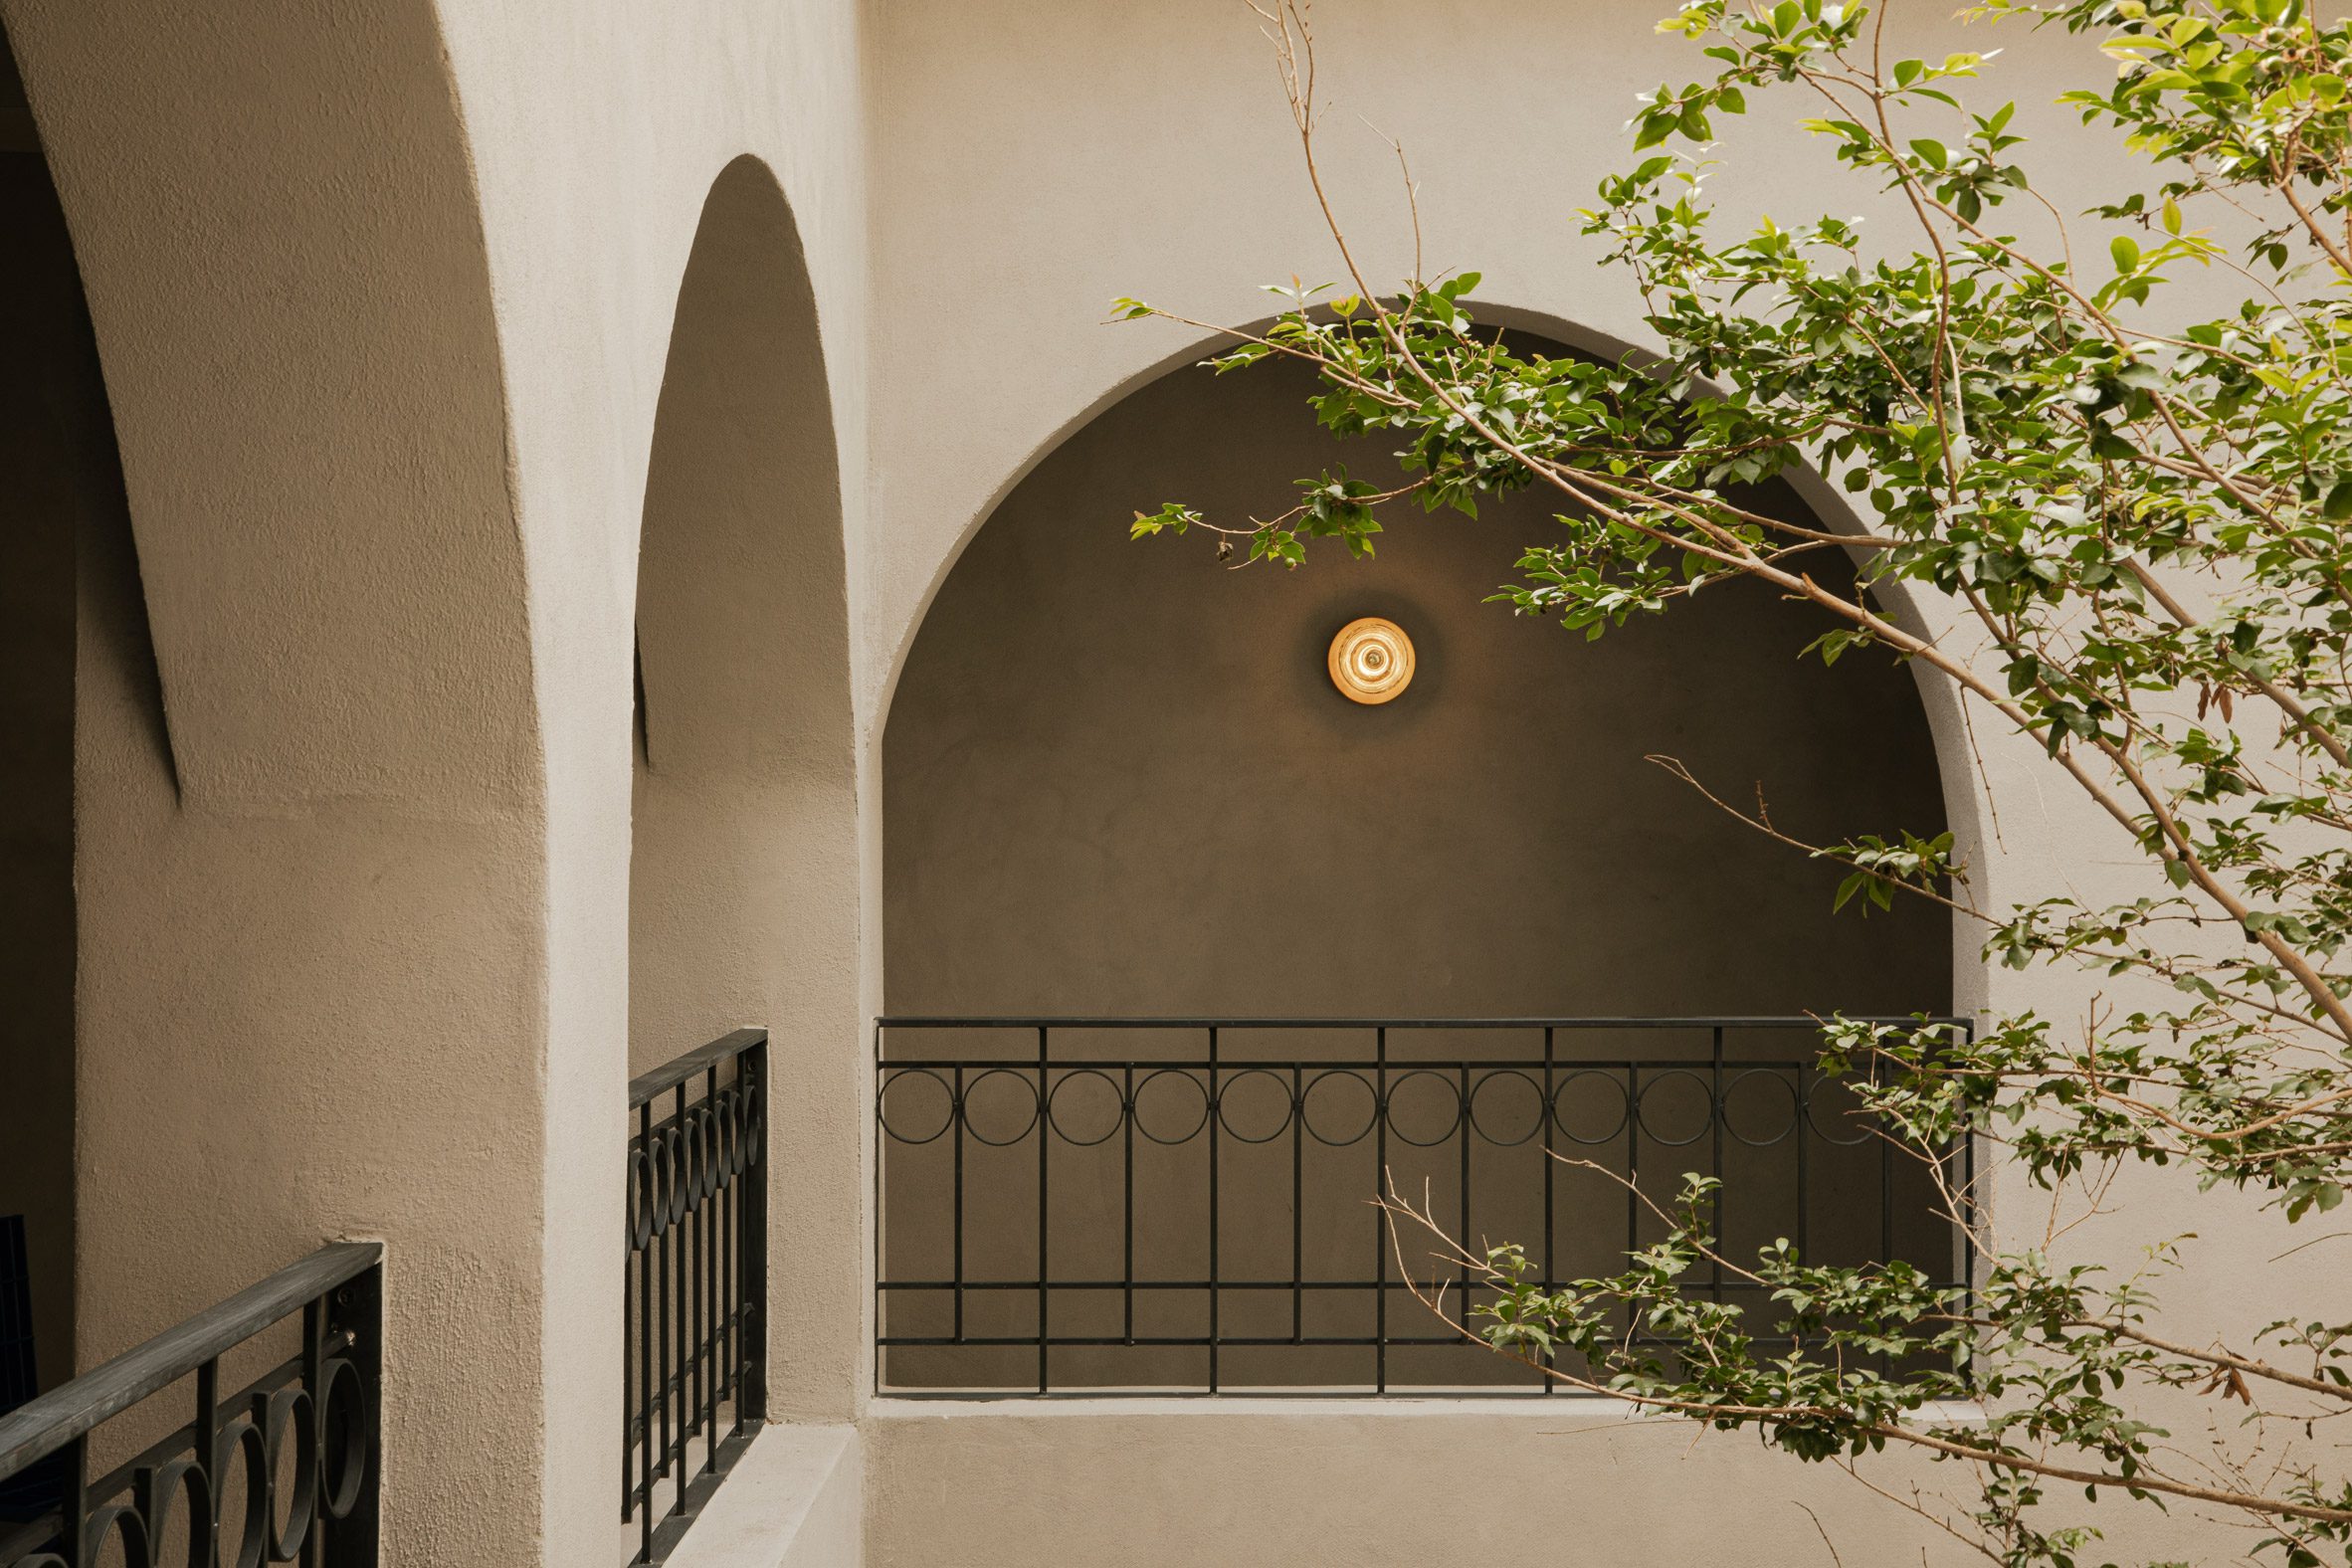 Arched openings with black cast-iron handrails